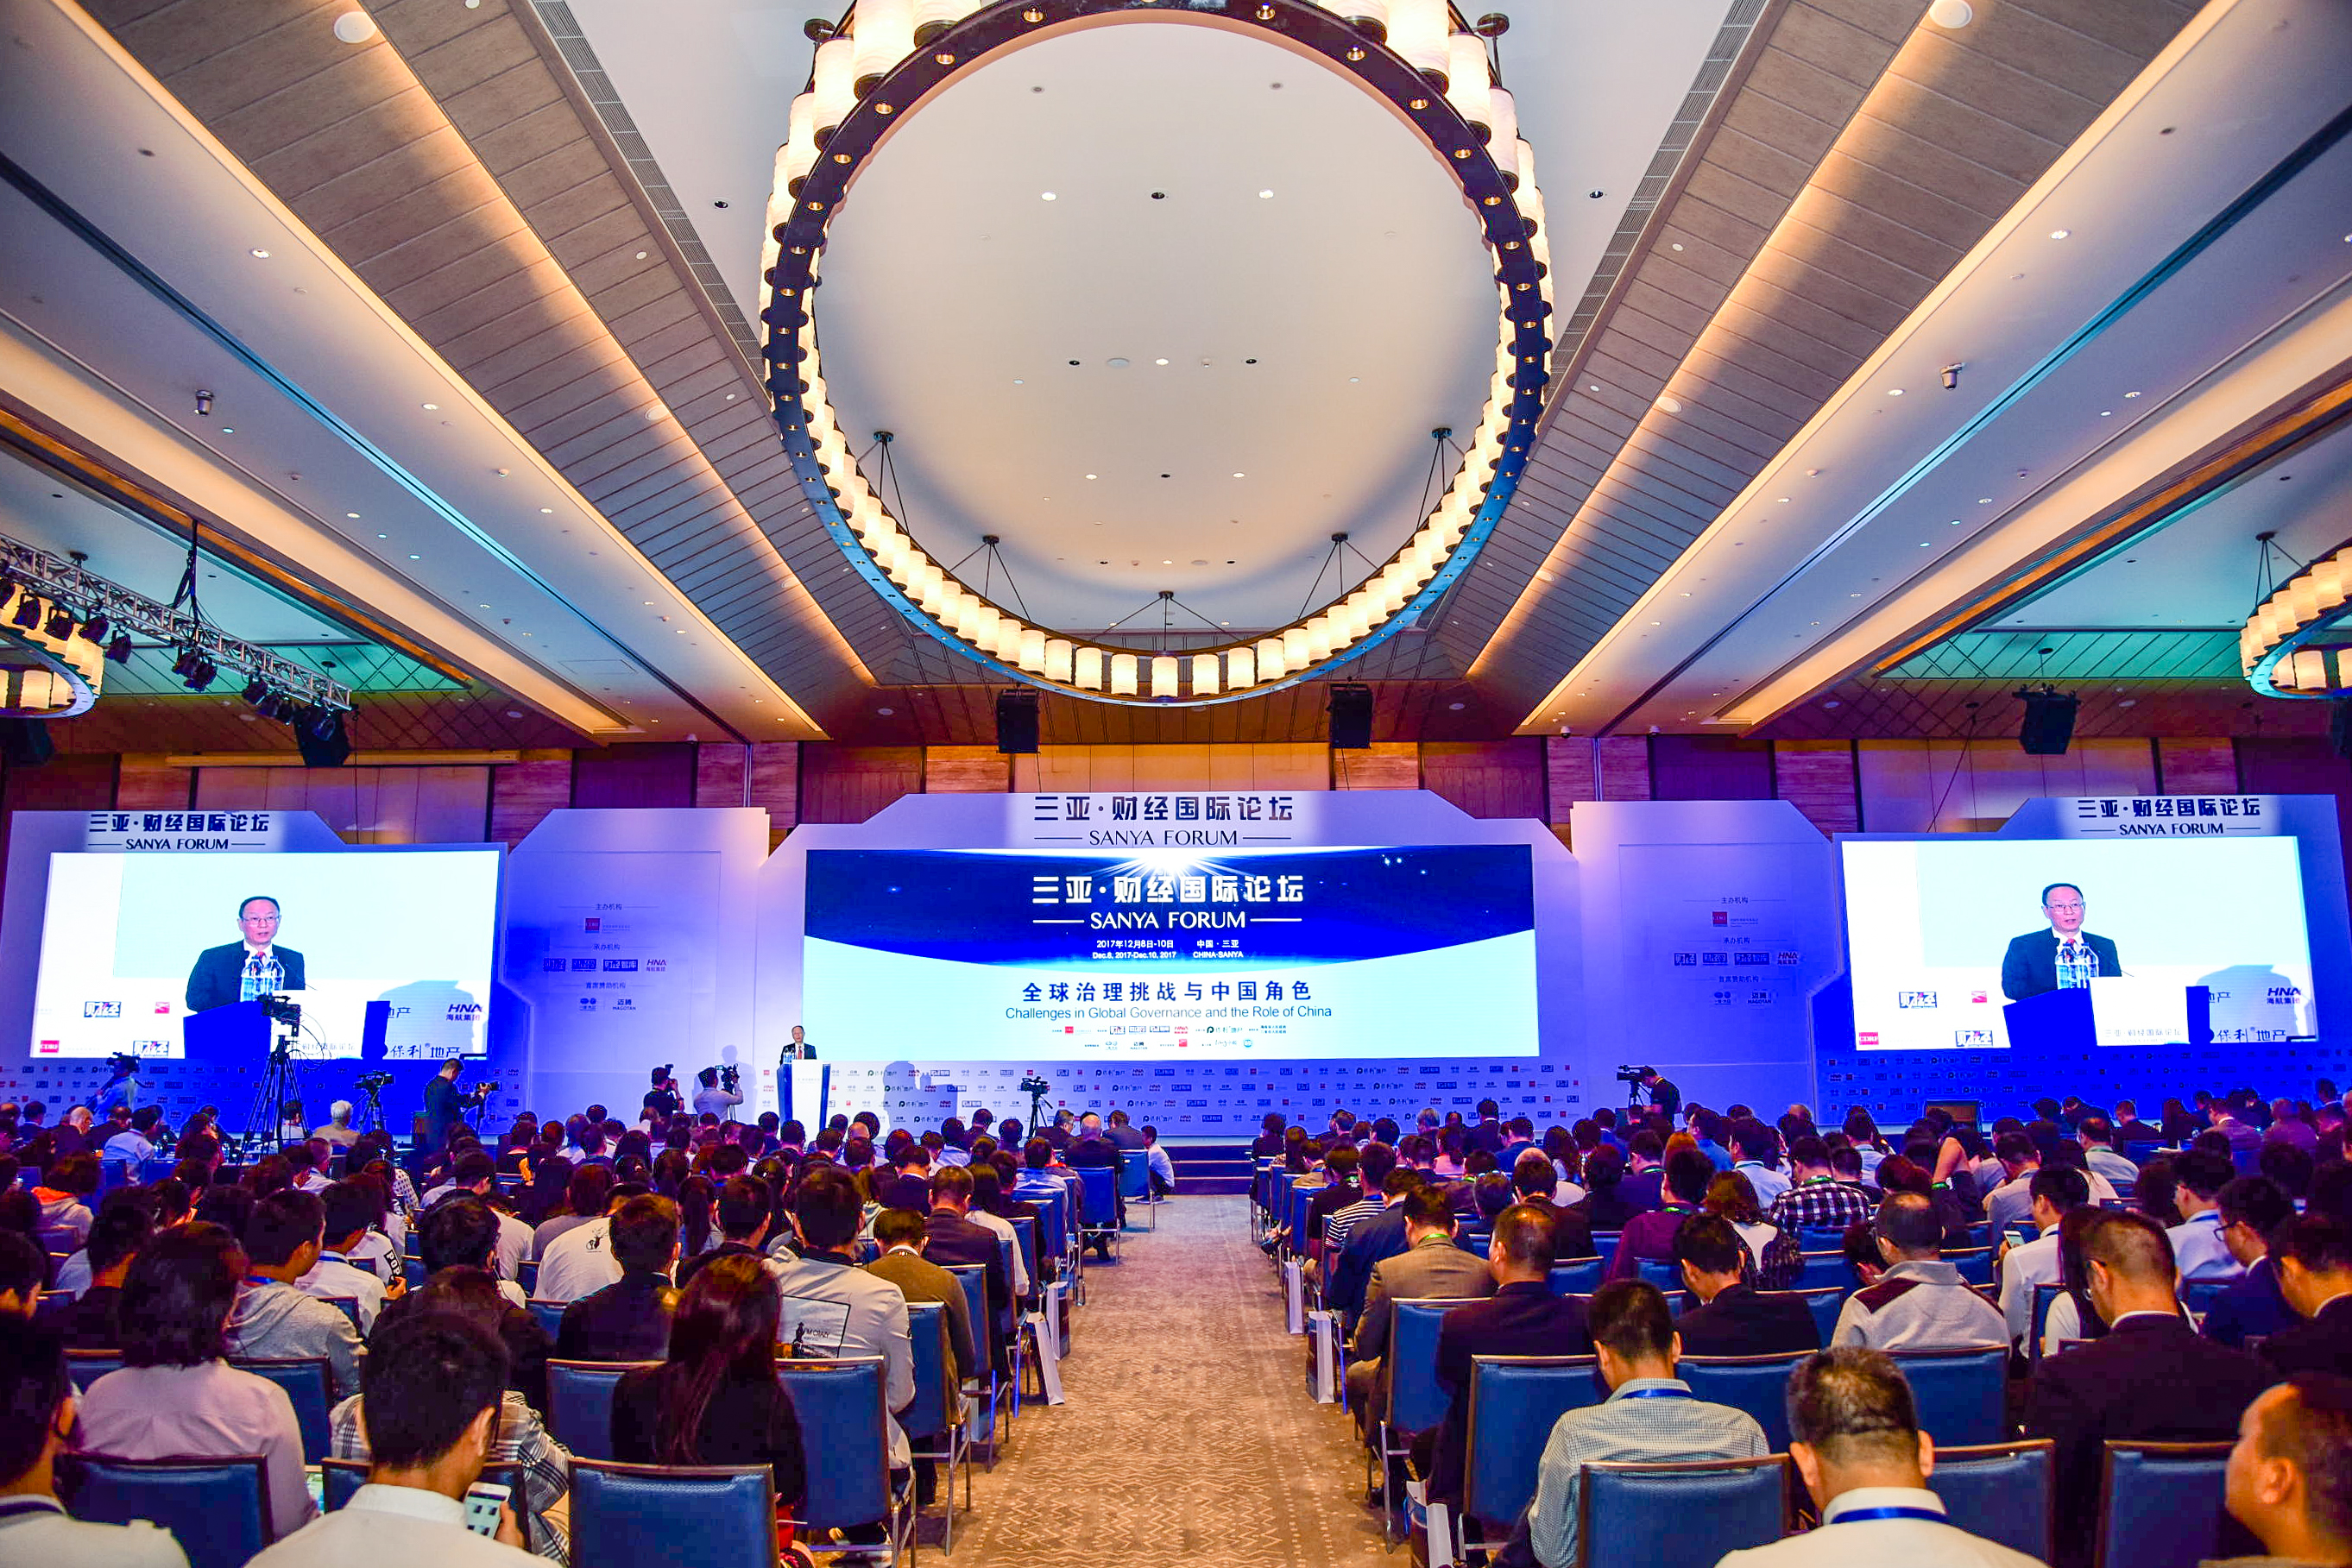 The Sanya Forum 2017 opens in Sanya, Hainan Province on Dec. 9. [Photo provided to China.org.cn]